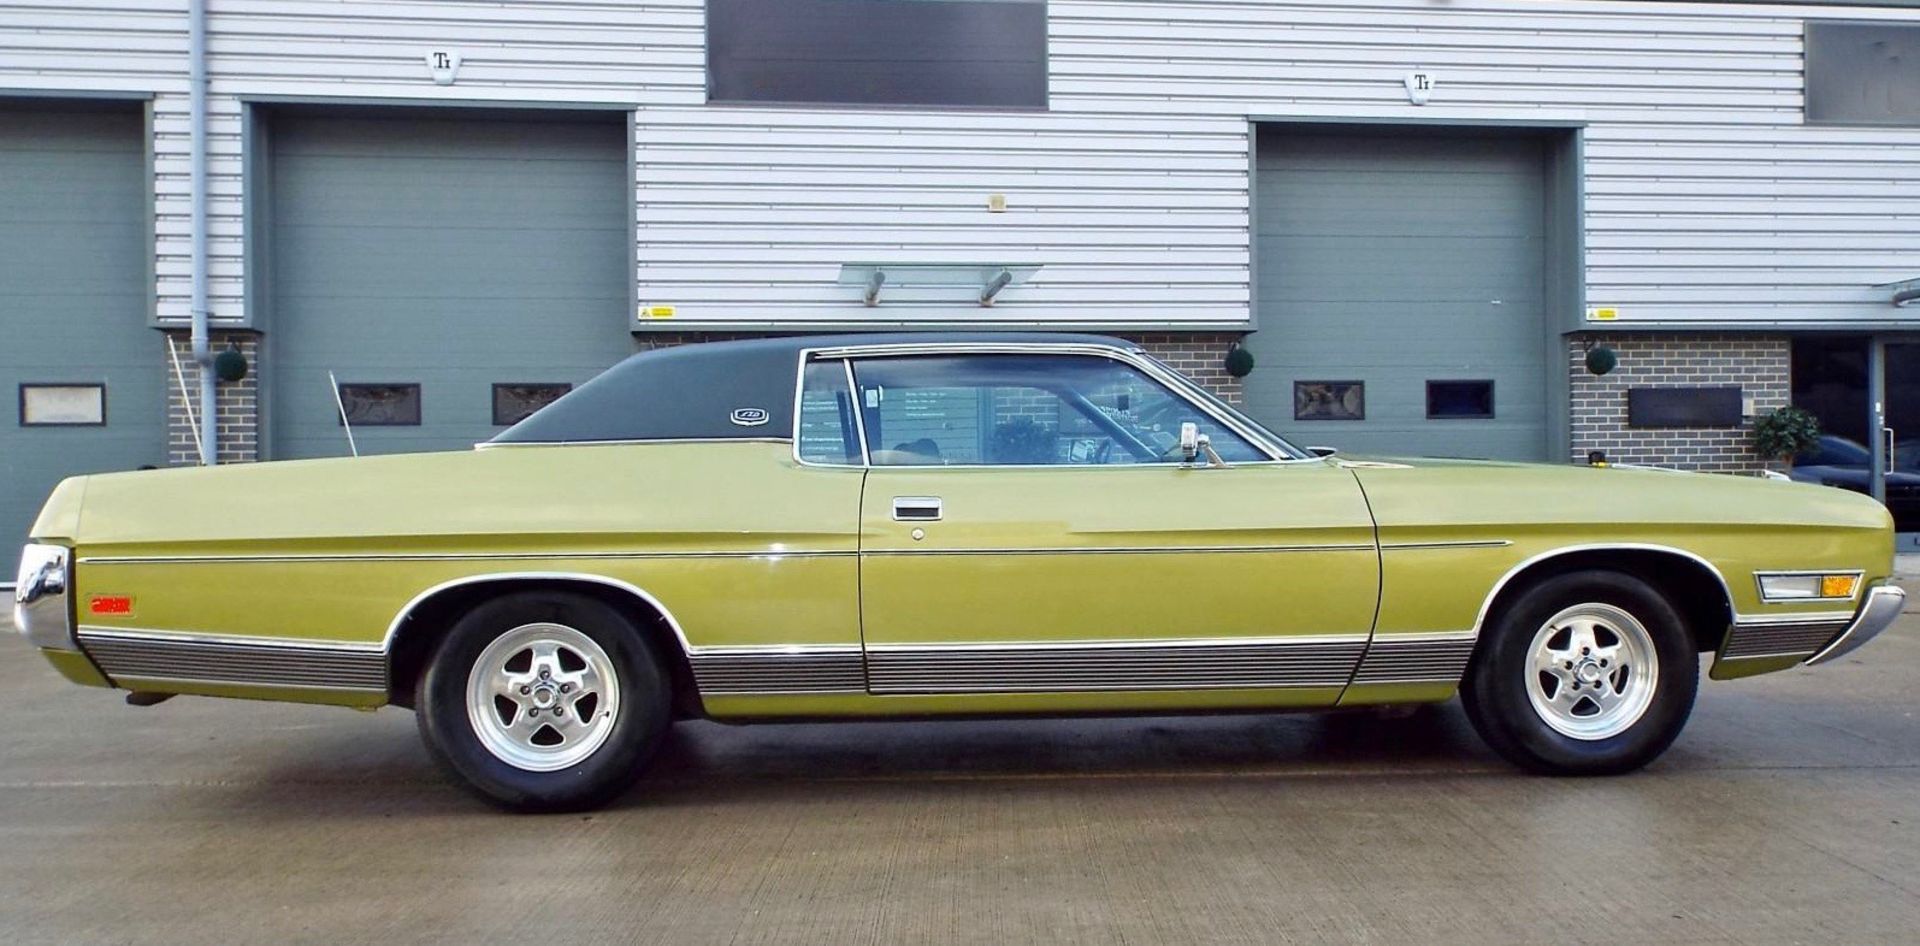 1972 Ford Galaxie 5.8 V8 Ltd Pure Original Example - Image 4 of 13